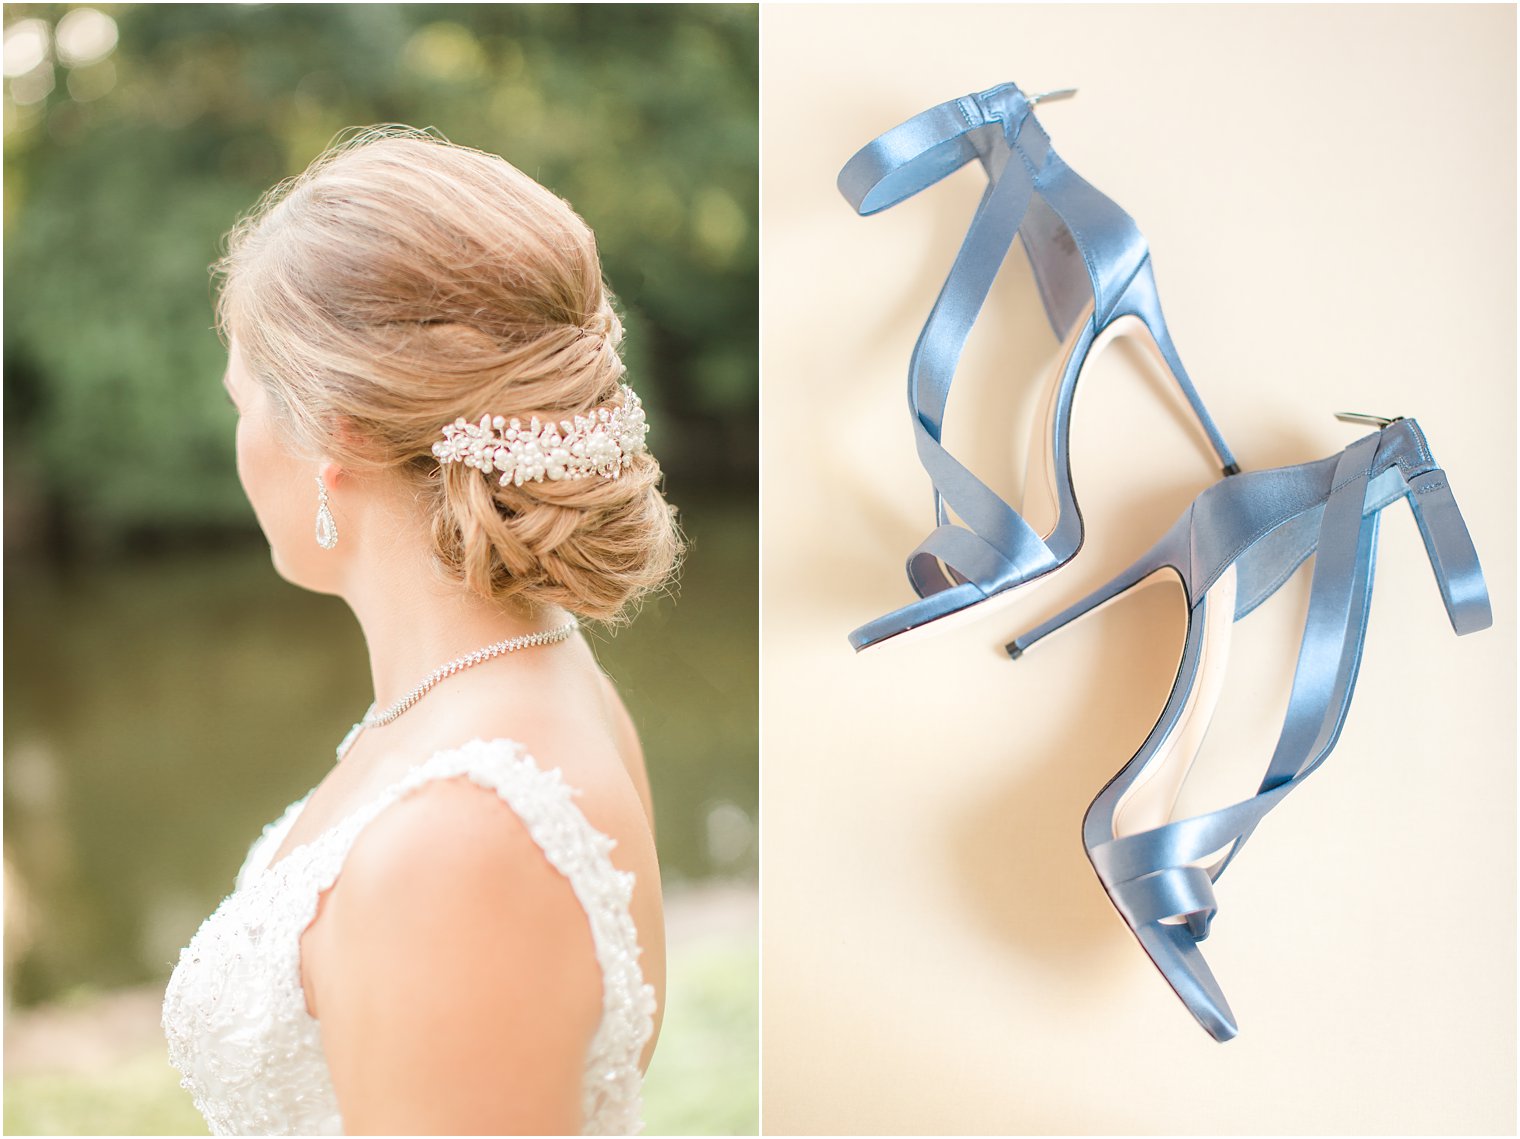 dusty blue heels by IMAGINE Vince Camuto photographed by Lambertville NJ wedding photographer